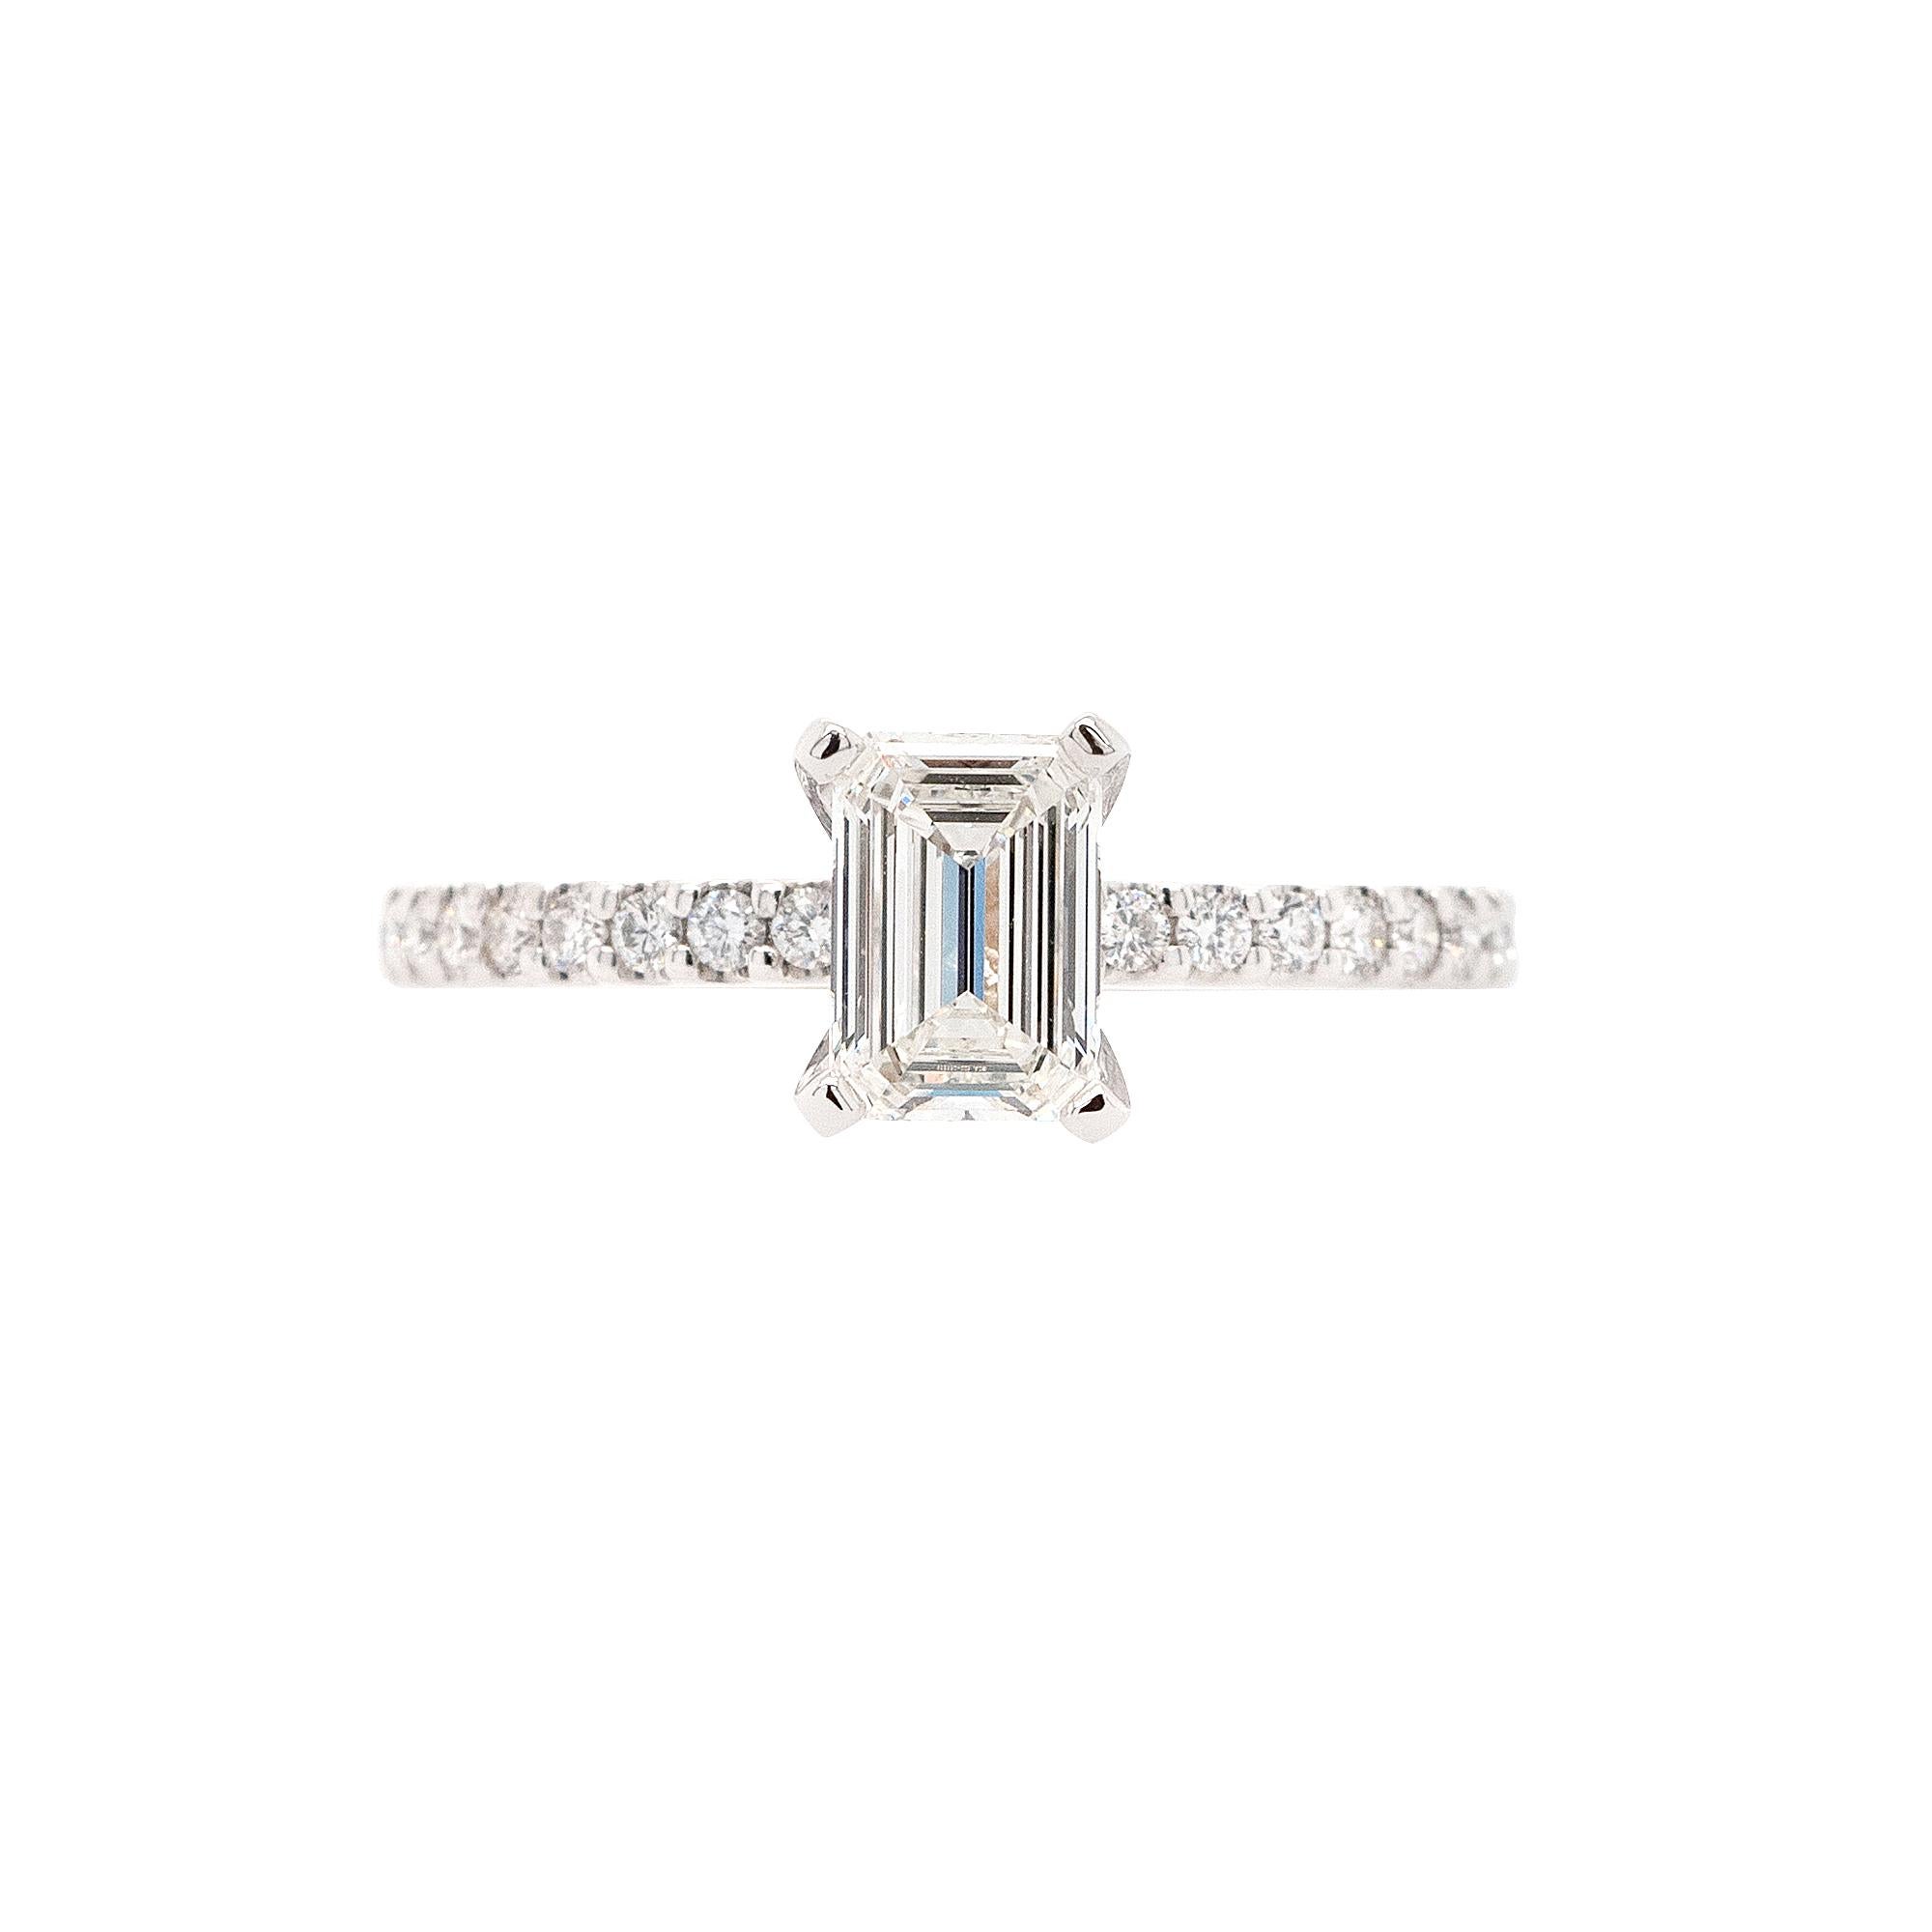 This Diamond Engagement Ring features a natural 0.90ct Emerald Cut Diamond with I color and VVS2 clarity. Made by Gabriel & Co., the ring is crafted from 14k white gold and showcases 0.36ctw of Round cut Diamonds with G/H color and VS clarity. It